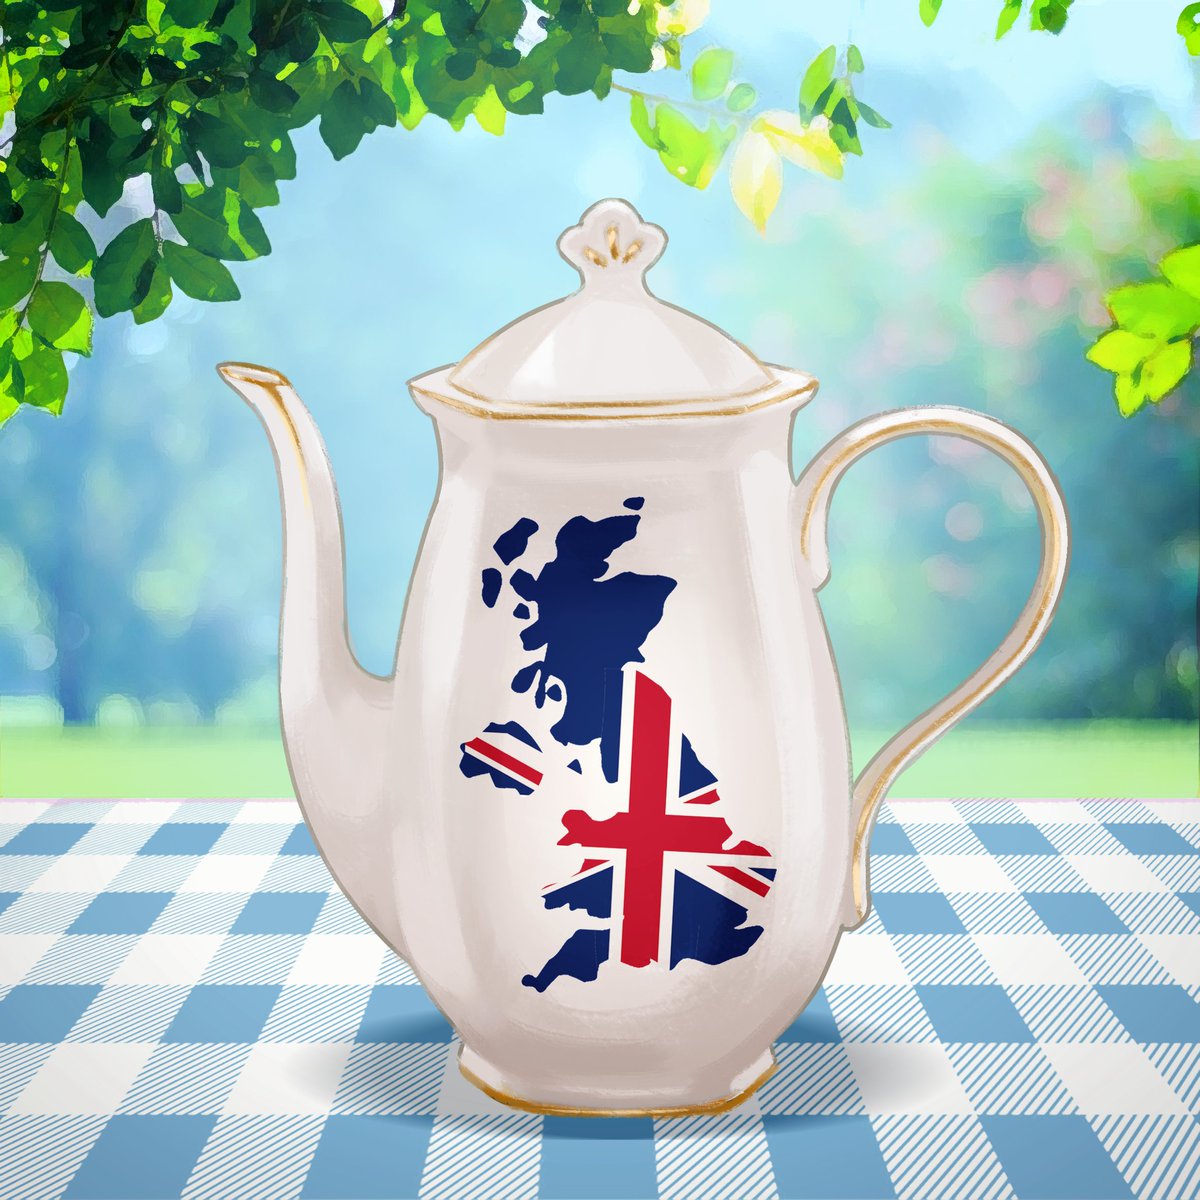 National Tea Day is observed in Britain every year on April 21st to celebrate the drinking of tea ! Get FREE GAMES on #BritishValues, #BritishTraditions and #BritishCulture at culturebuffgames.com

#britishness #britishvalues #british #britishculture #culturegames